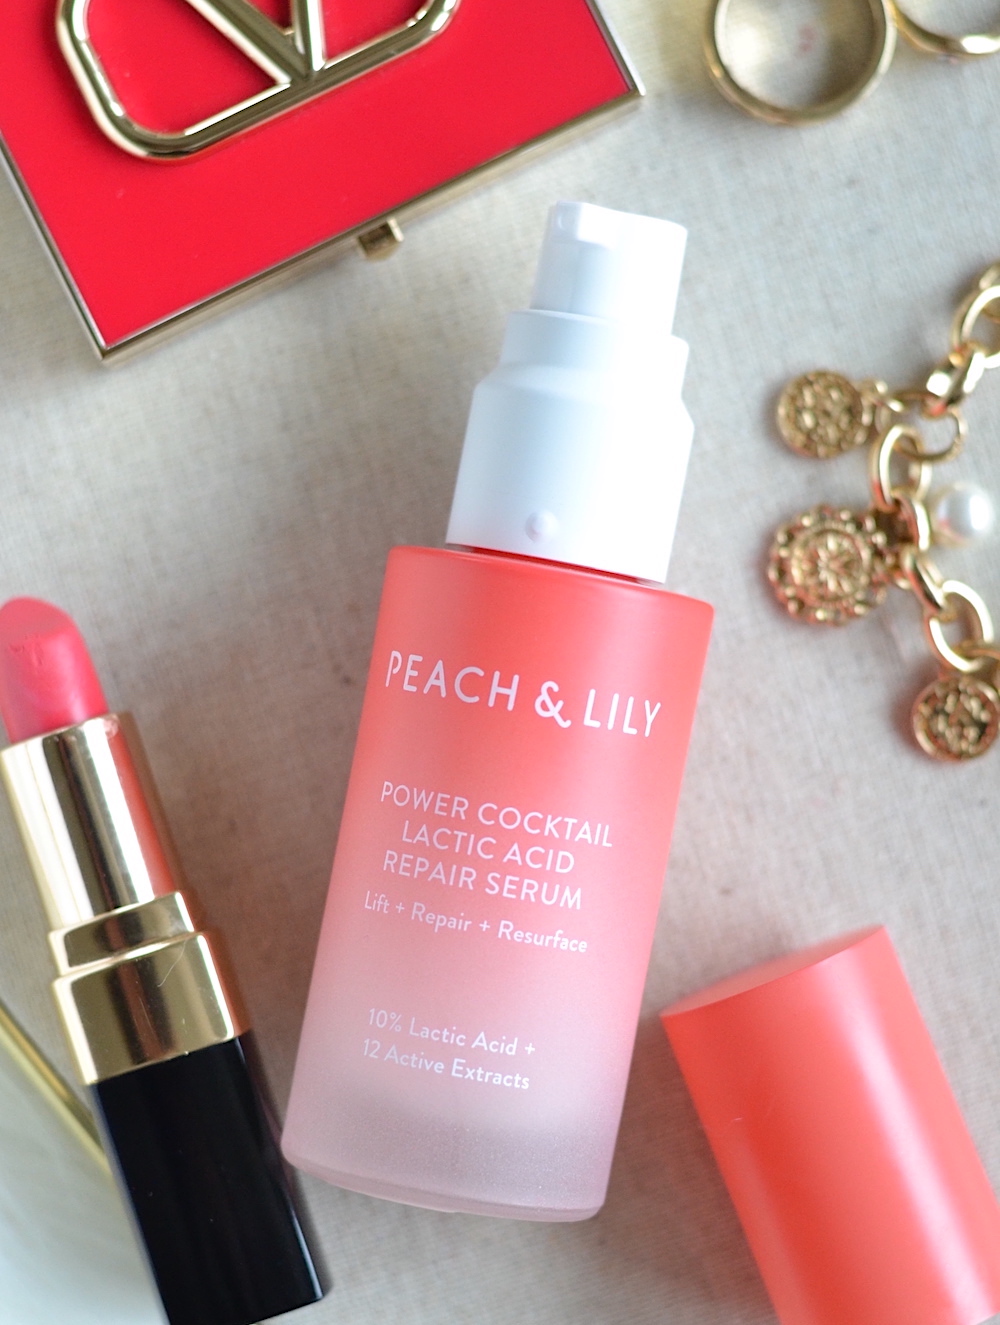 Gentle, effective and under $50! Peach & Lily Lactic Acid Serum tackles dull, uneven skin tone/texture for brighter skin and smooths fine lines while boosting hydration!